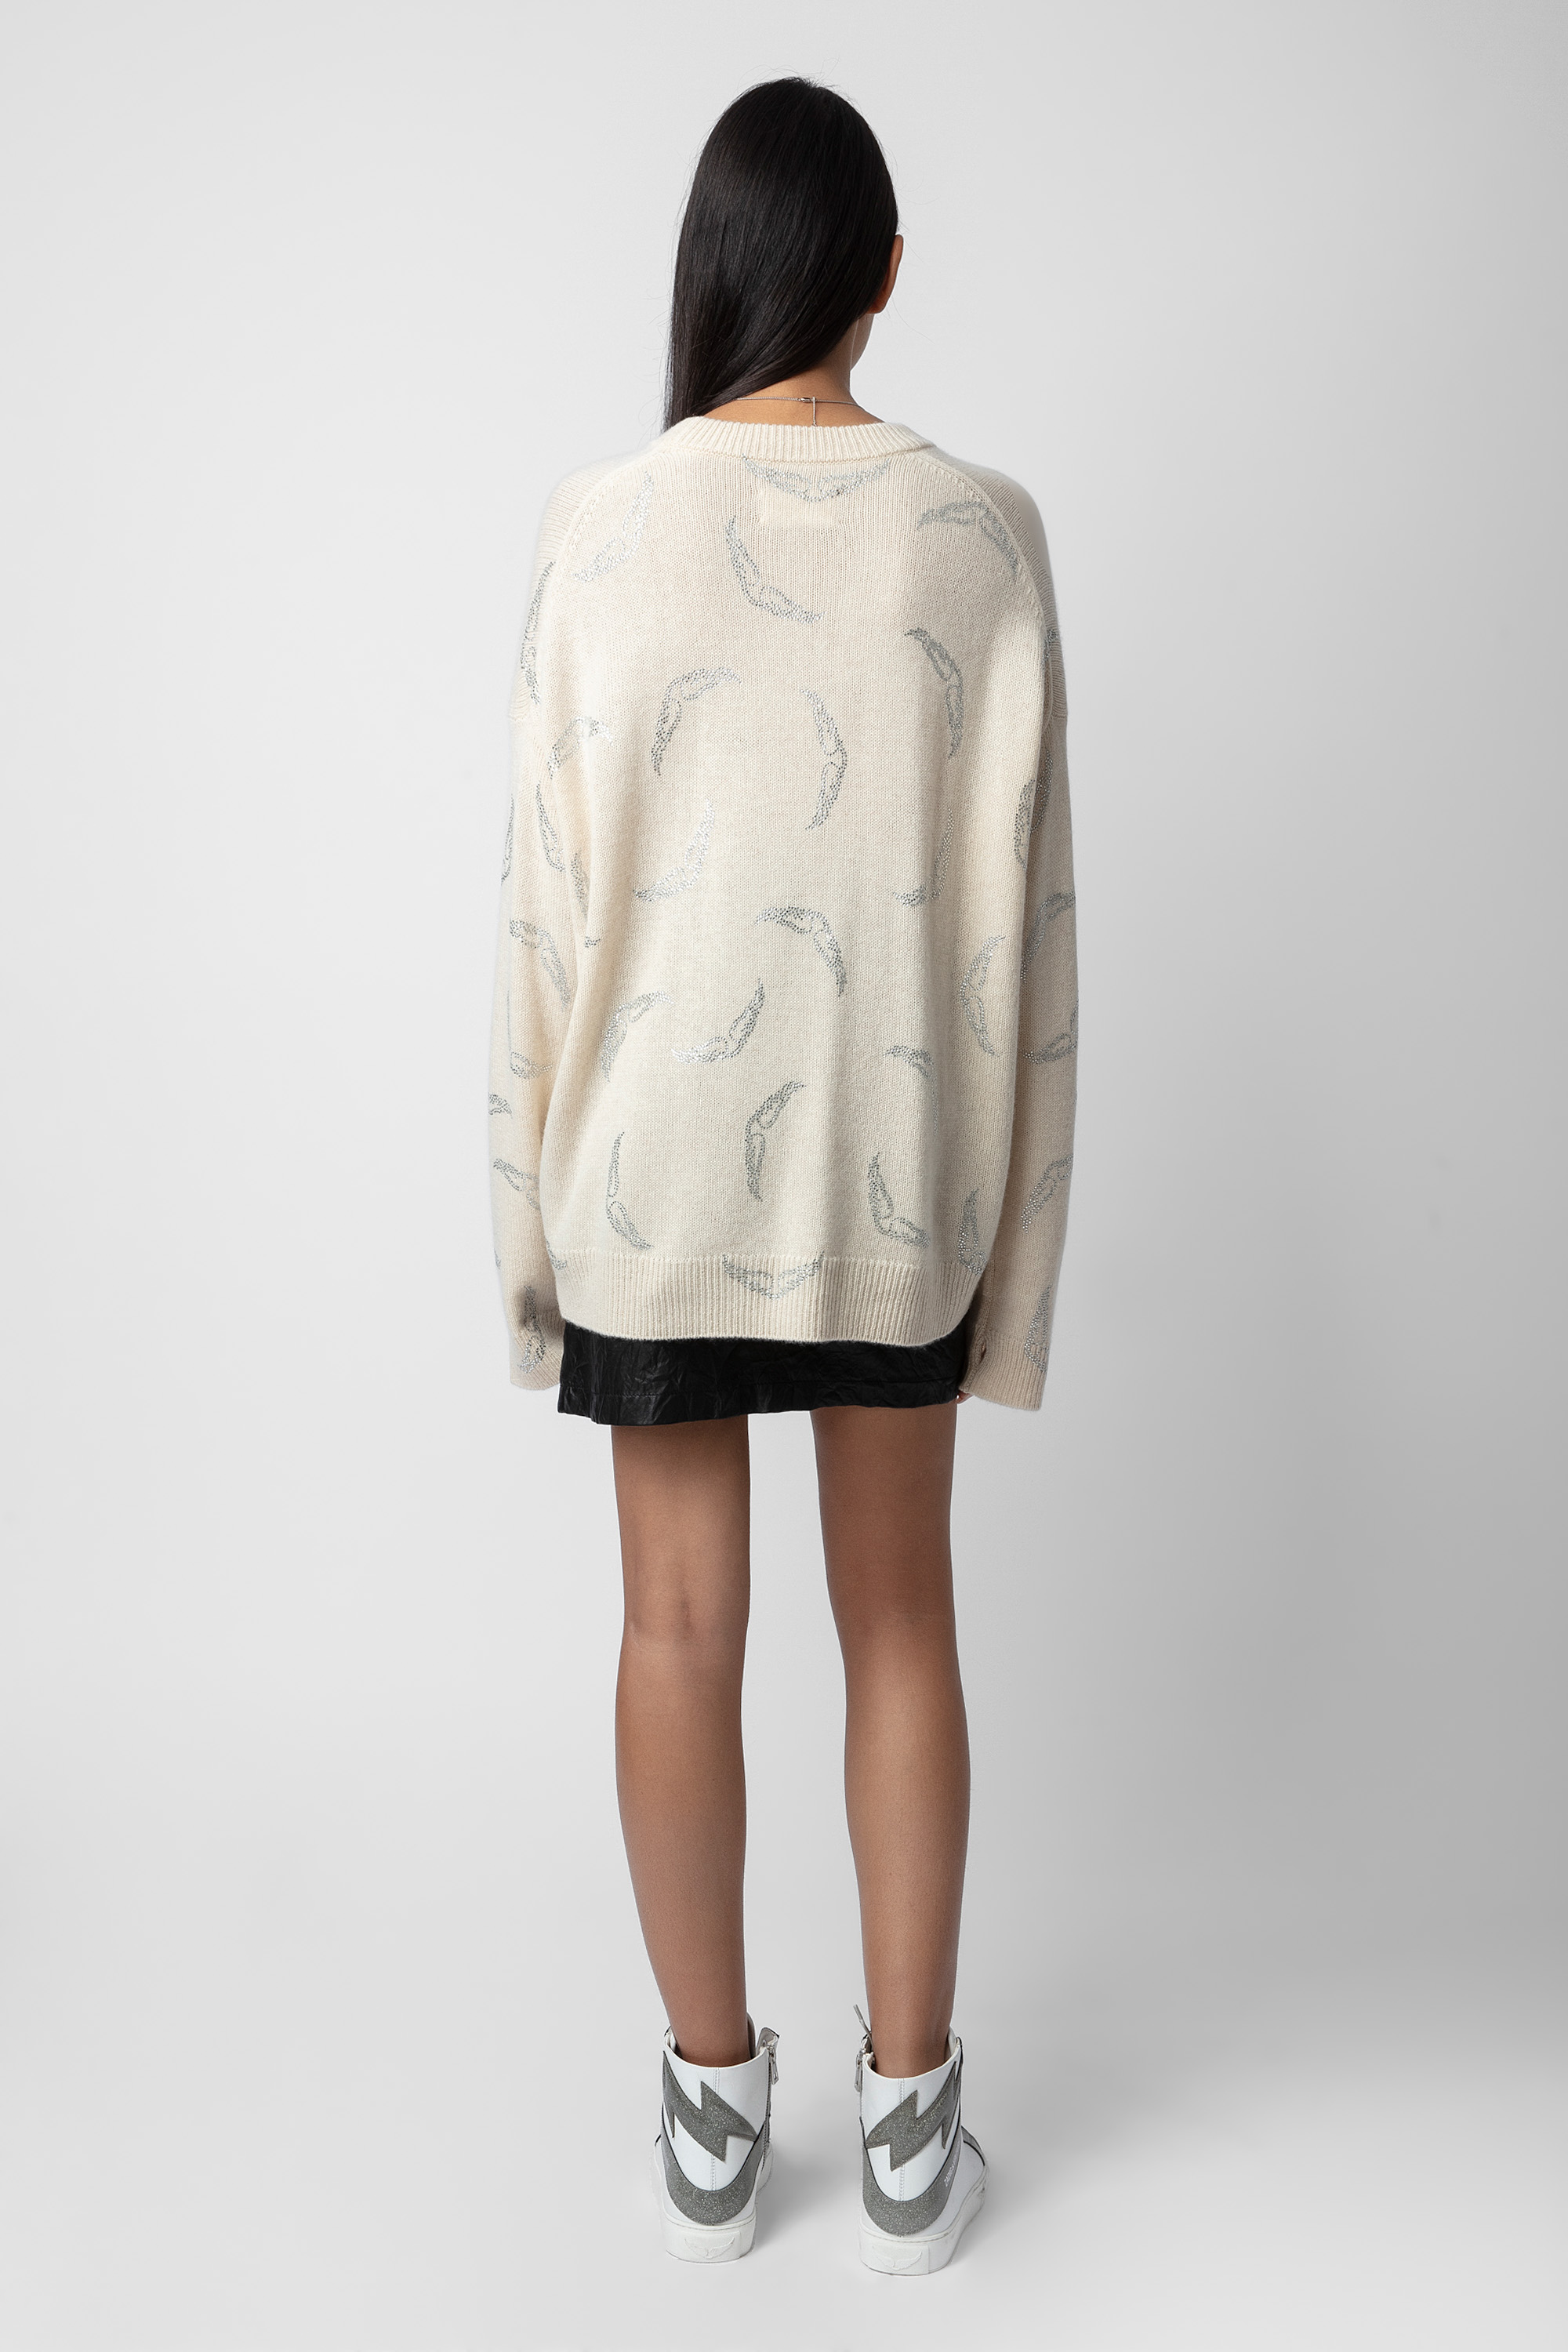 Markus Wing Strass Cashmere Sweater